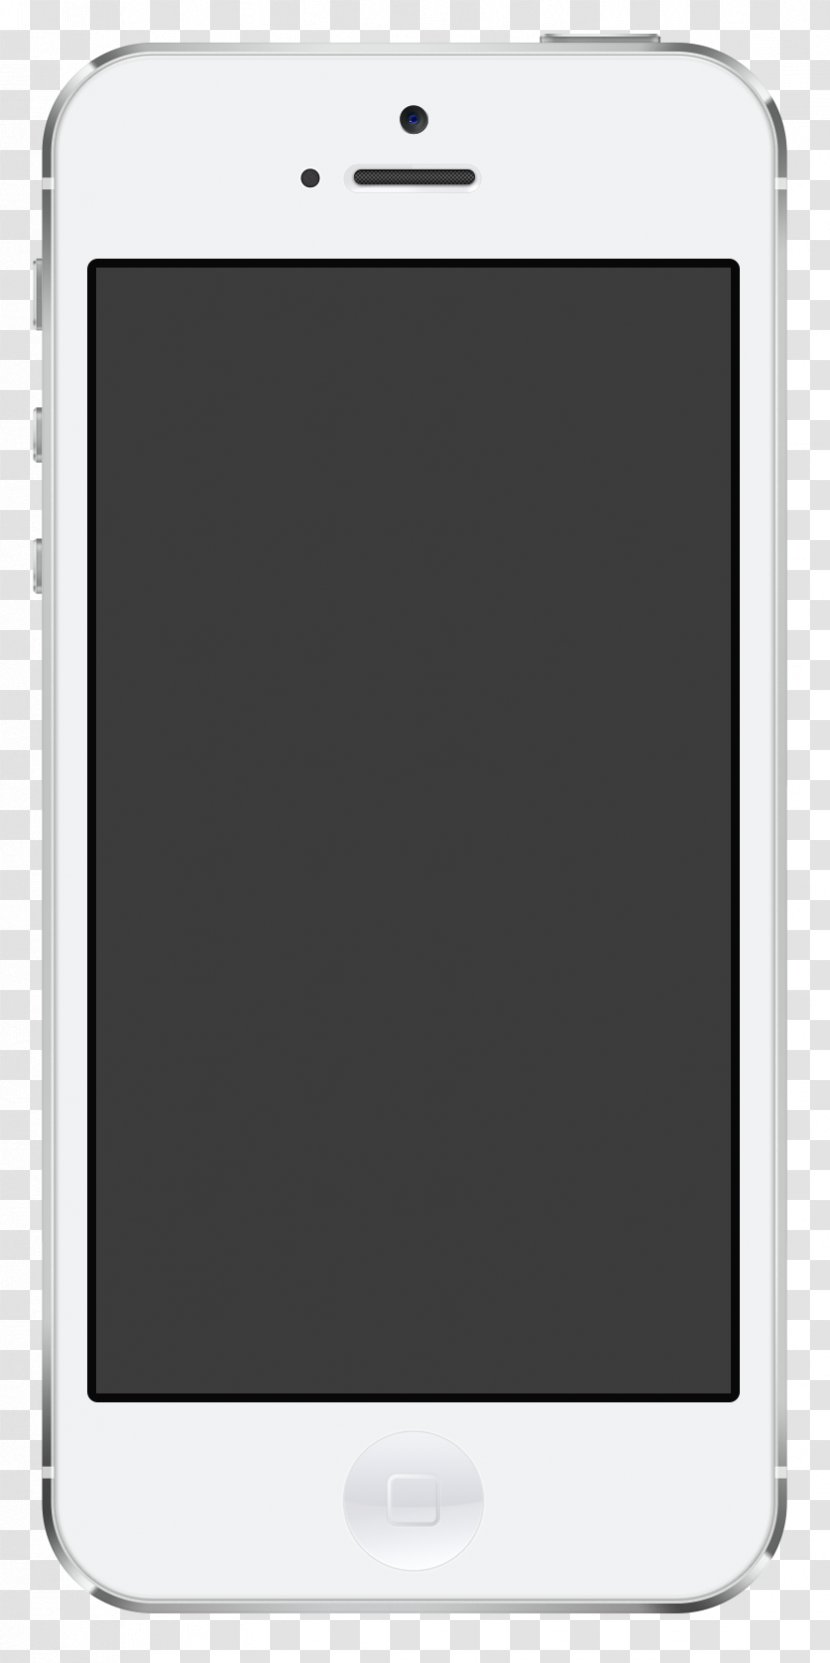 IPhone 4S 6 X 8 Face ID - Product Design - Apple Iphone Image Transparent PNG